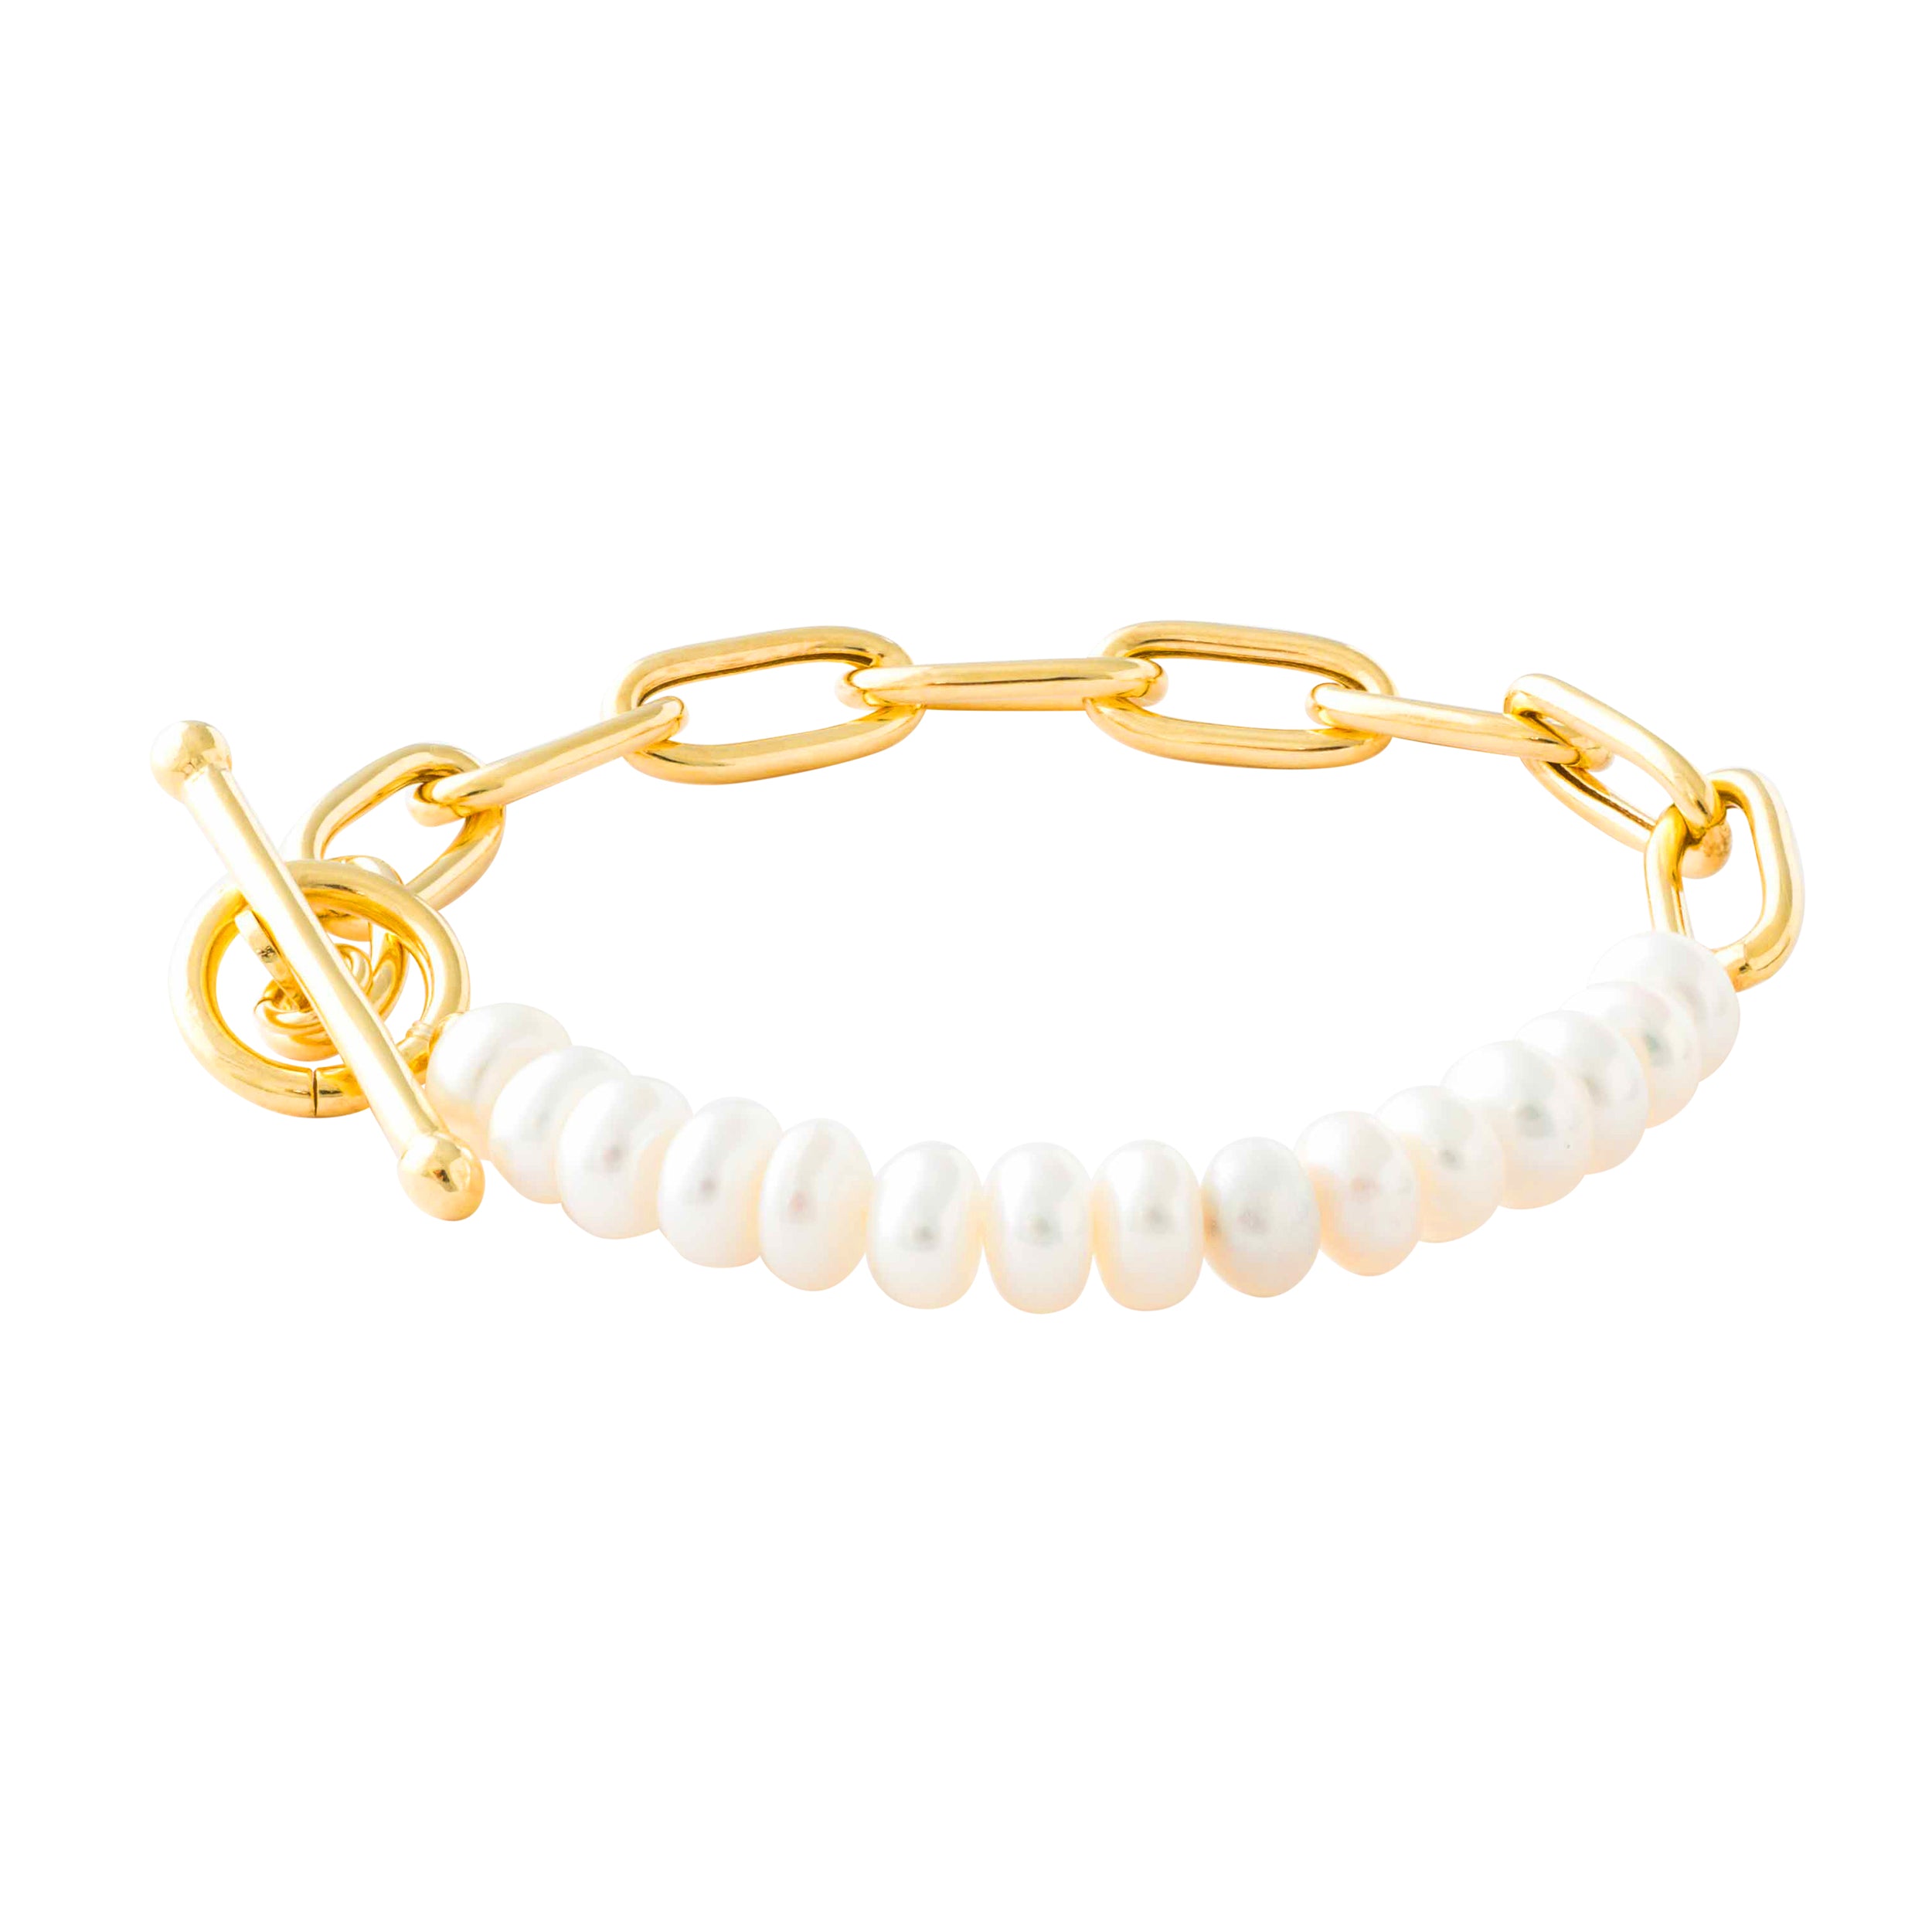 PEARL AND GOLD LONG LINK CHAIN BRACELET